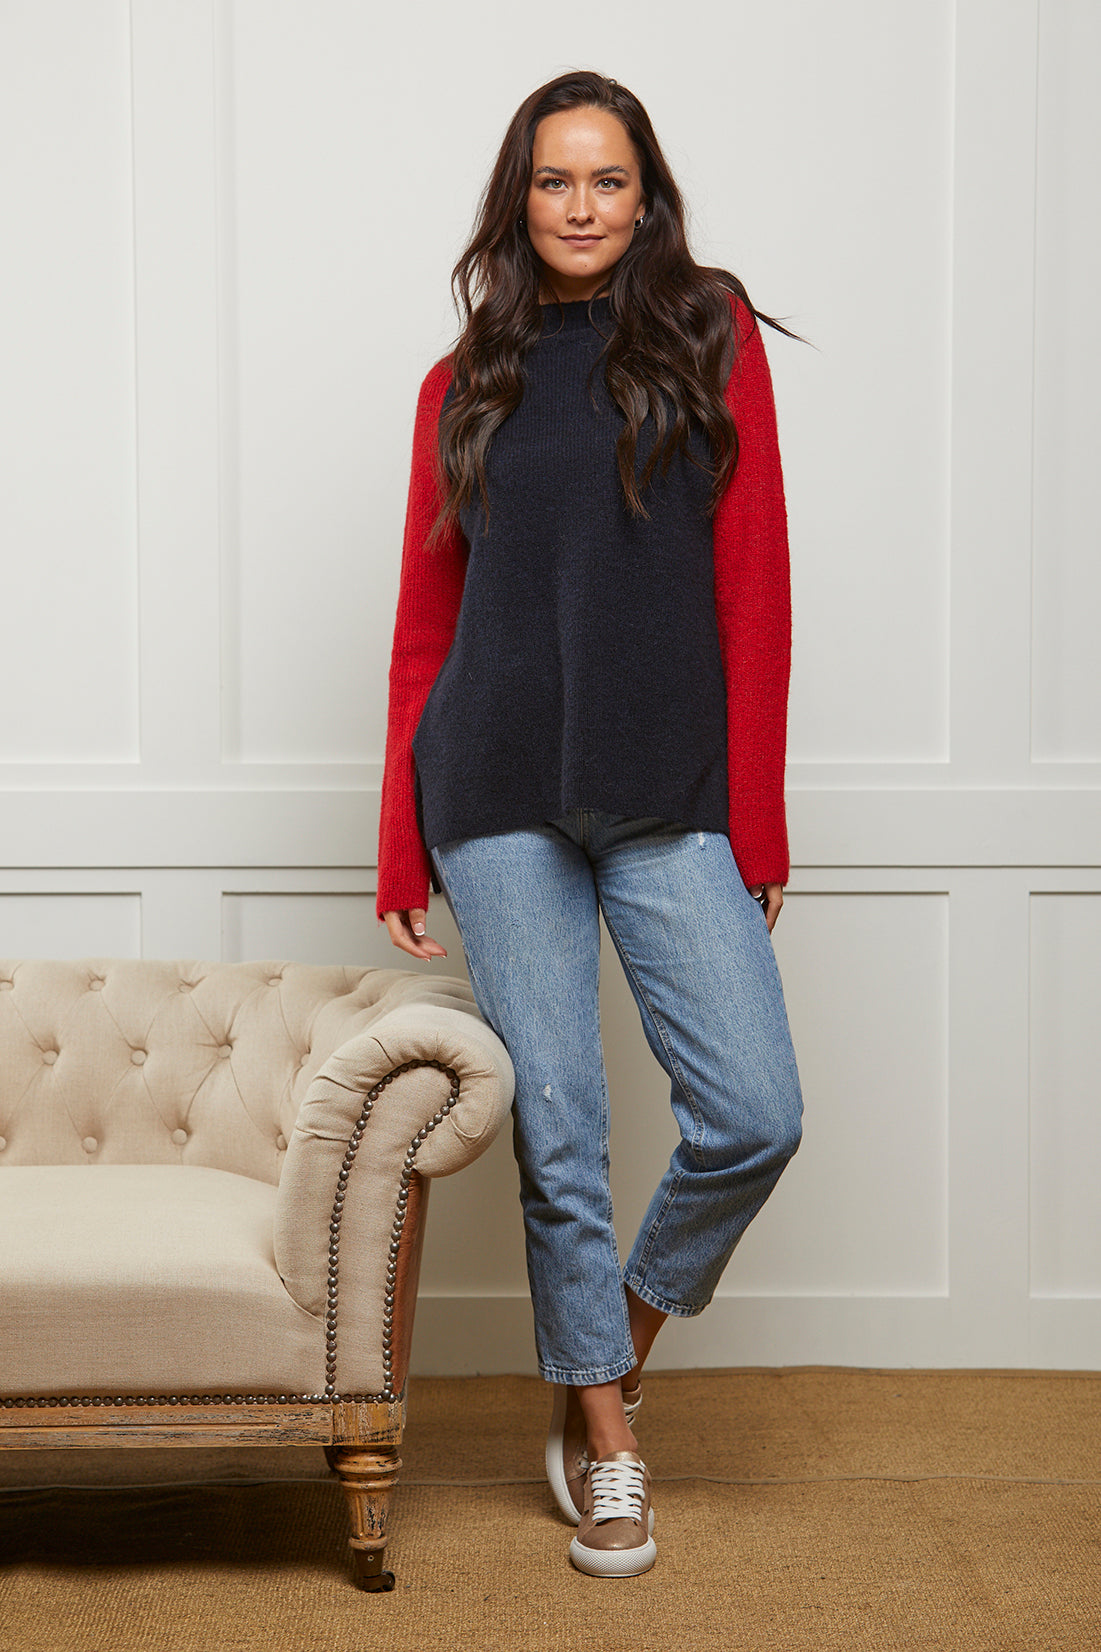 Relaxed fit women's navy and red jumper. This wool blend jumper has navy body and contrast red sleeves.